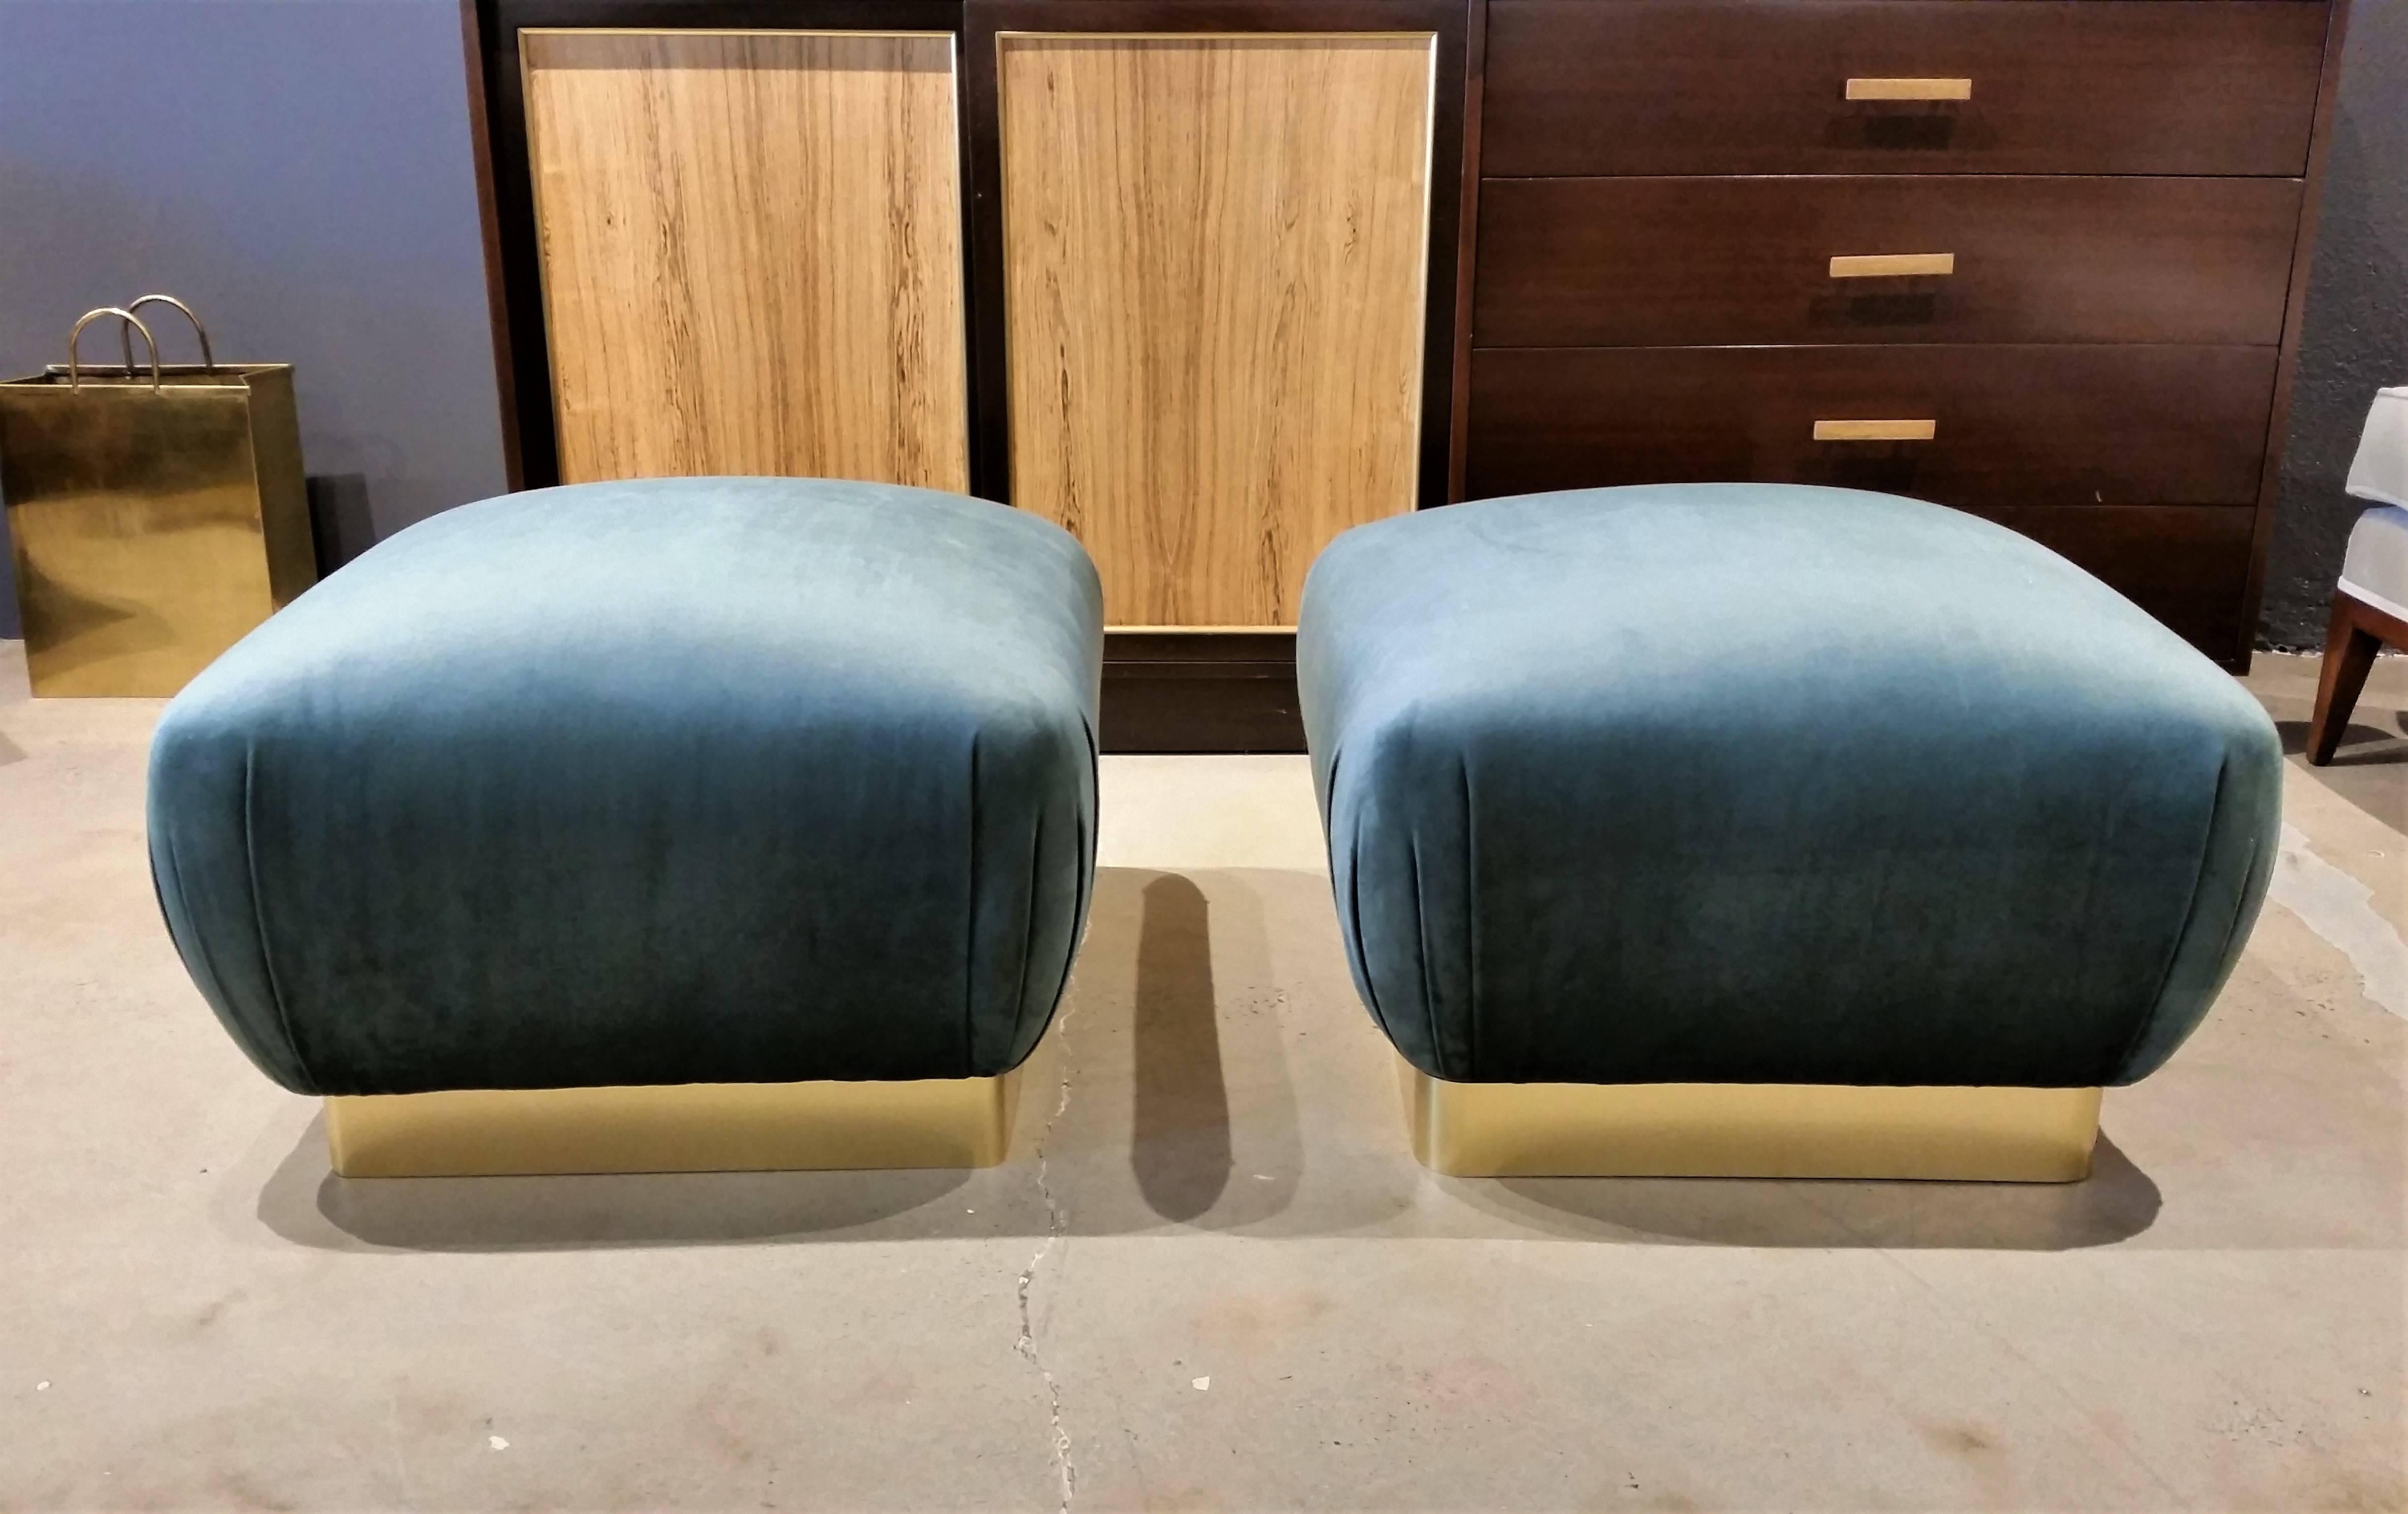 Stunningly glam pair of souffle poufs in the style of Karl Springer, 1970s. Completely restored with new brass wrapped bases and plush blue green velvet upholstery. Incredible accent pieces work well as seating or as ottomans or benches. 

Whether